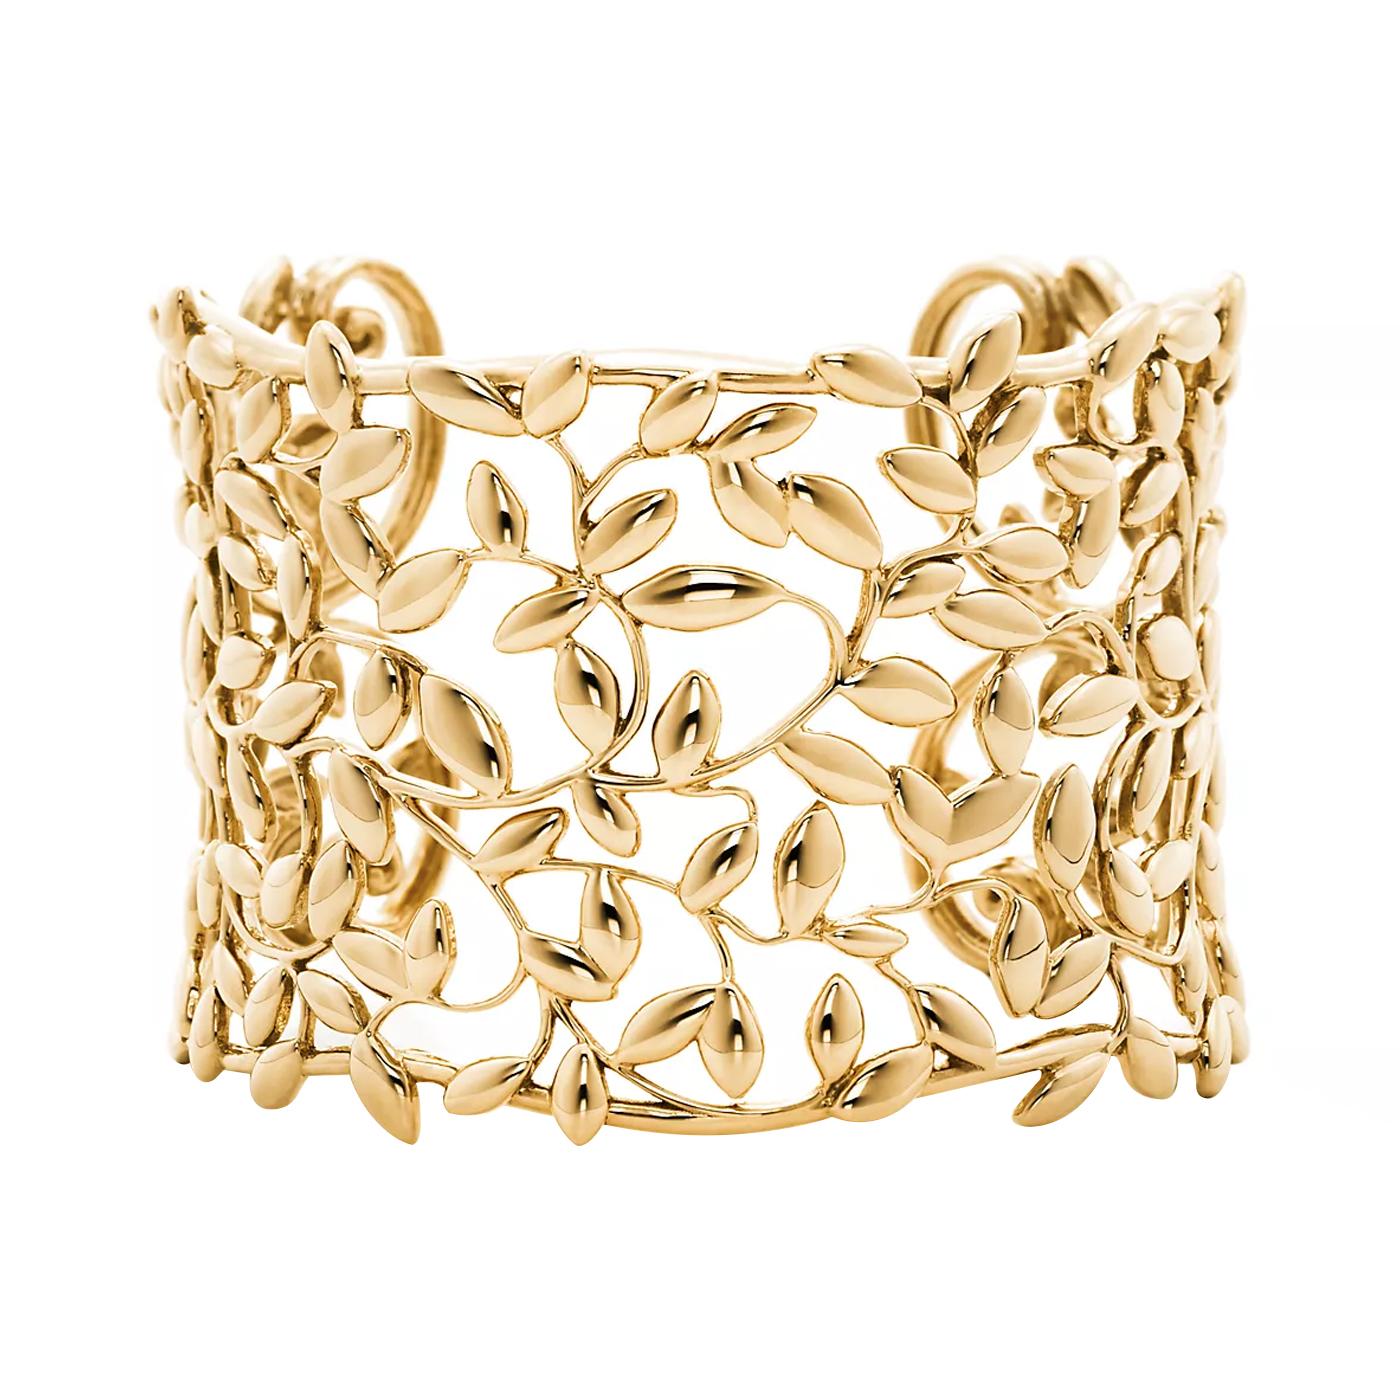 Inspired by the olive branch, a symbol of peace and abundance. Cuff in 18k gold. Size medium. Original designs copyrighted by Paloma Picasso. Paloma Picasso’s creations artfully combine timeless sophistication with bold style. Joining Tiffany in